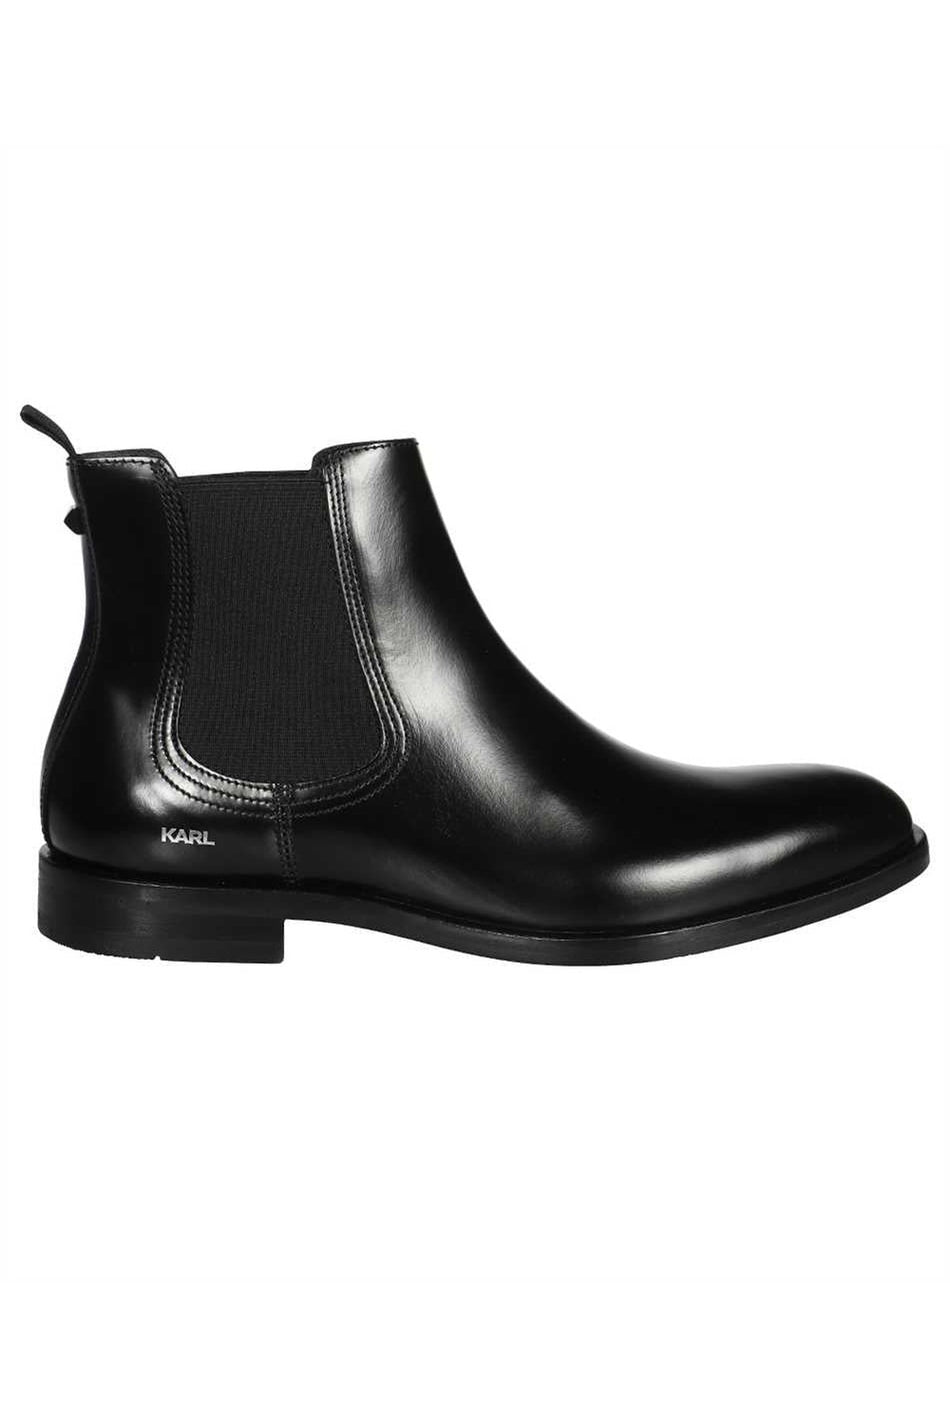 Leather Chelsea boots-Karl Lagerfeld-OUTLET-SALE-43-ARCHIVIST